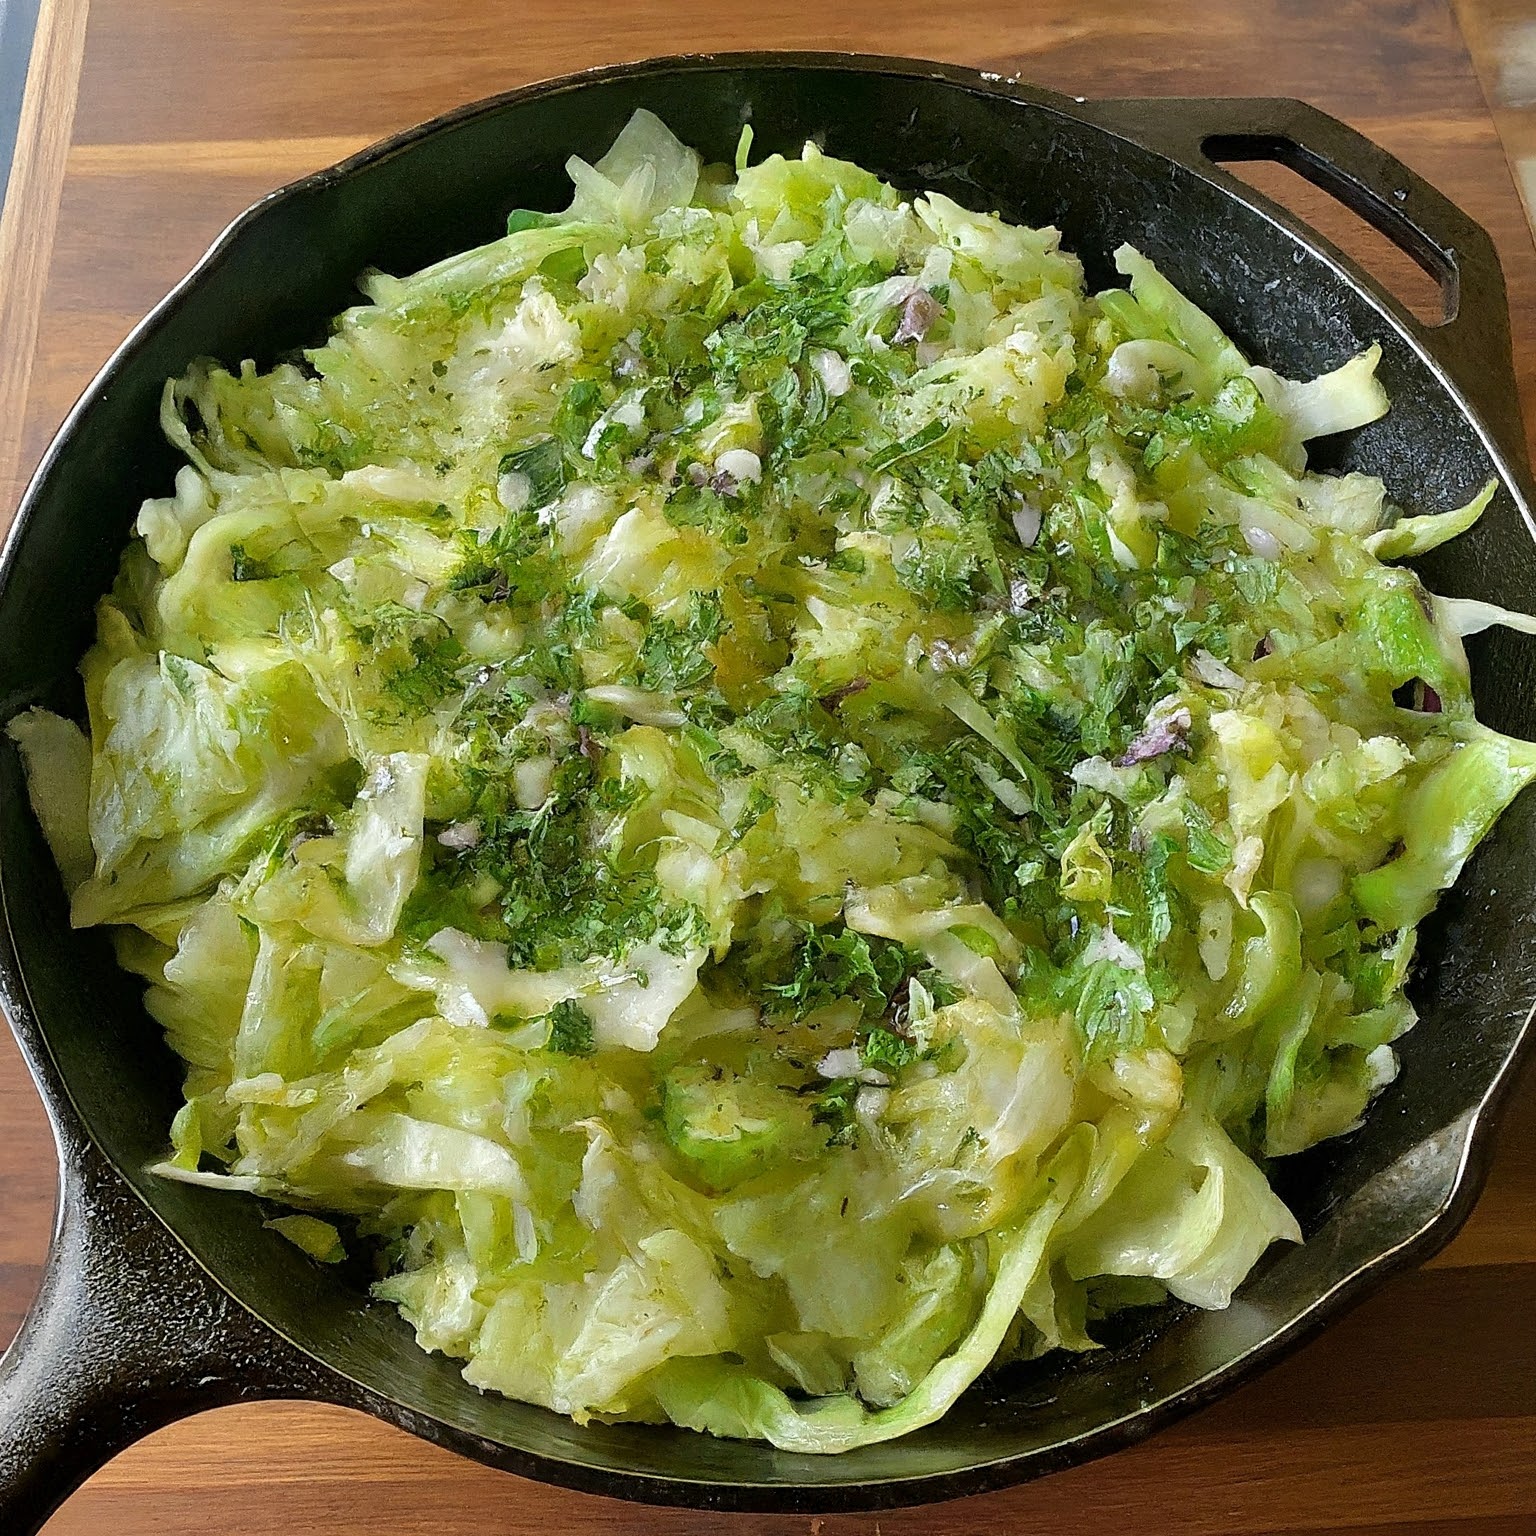 Easy Vegan Sauteed Cabbage with Garlic and Herbs Recipe